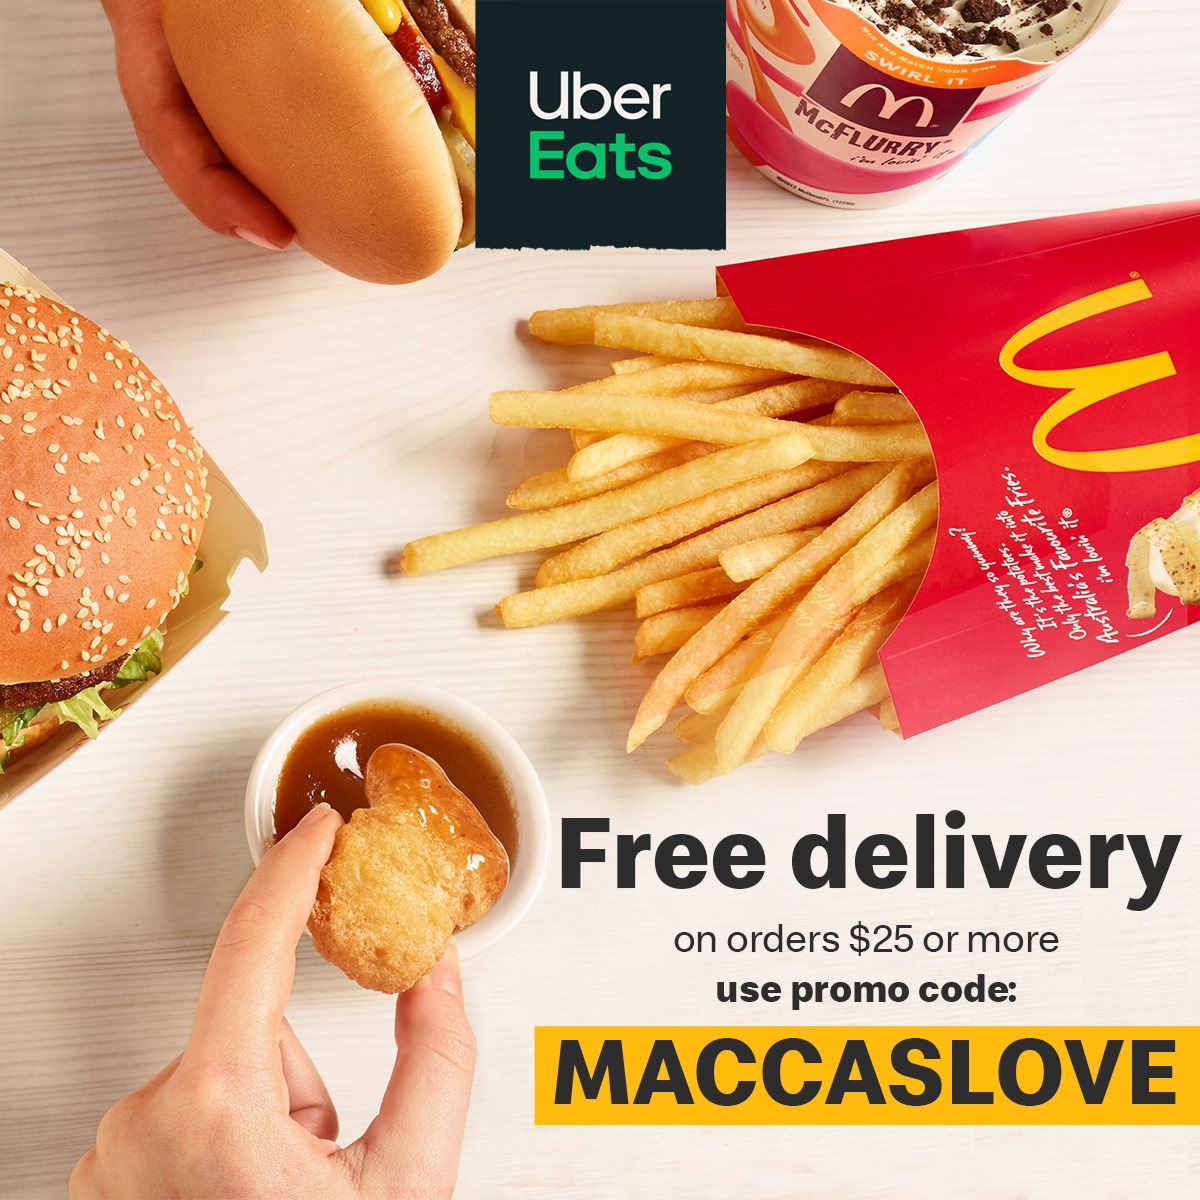 Deal Mcdonald S Free Delivery On Orders Over 25 Via Uber Eats 24 26 April 2020 Frugal Feeds